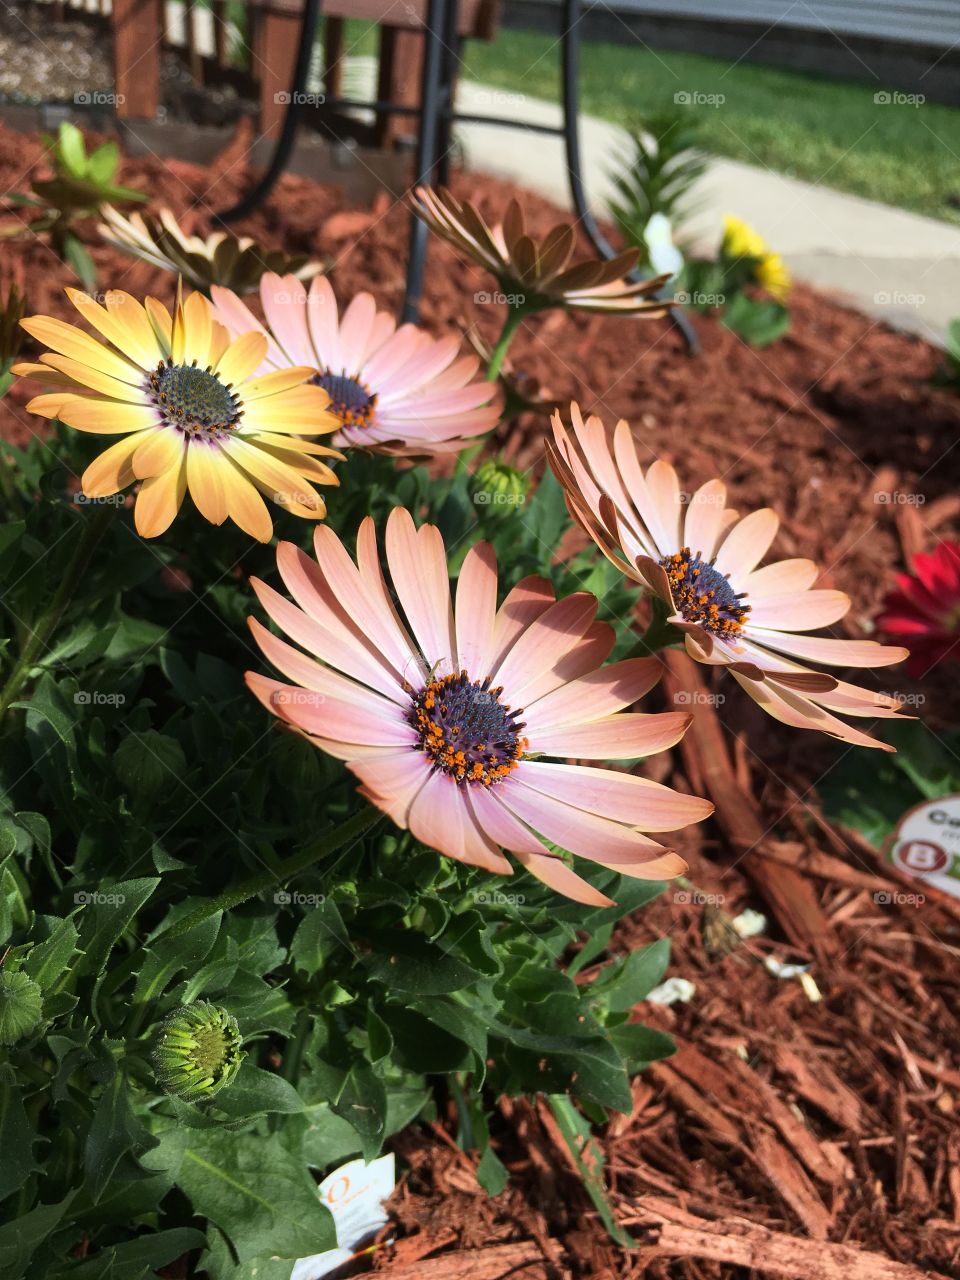 Daisies I planted in my garden